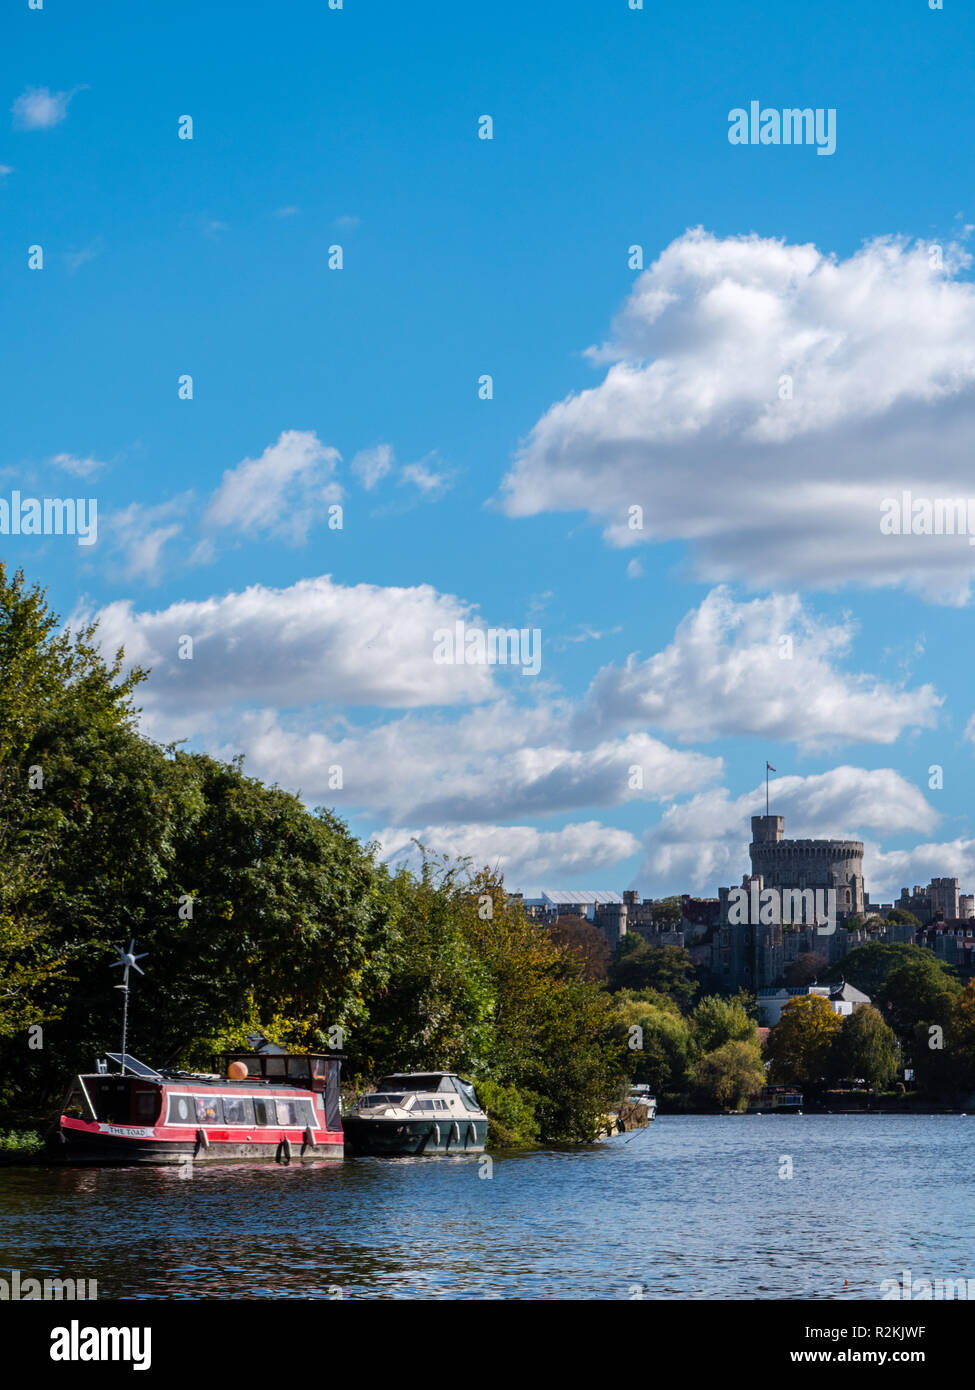 Narrow Boat, View of Windsor Castle Across River Thames with Autumn Trees, Windsor, Berkshire, England, UK, GB. Stock Photo